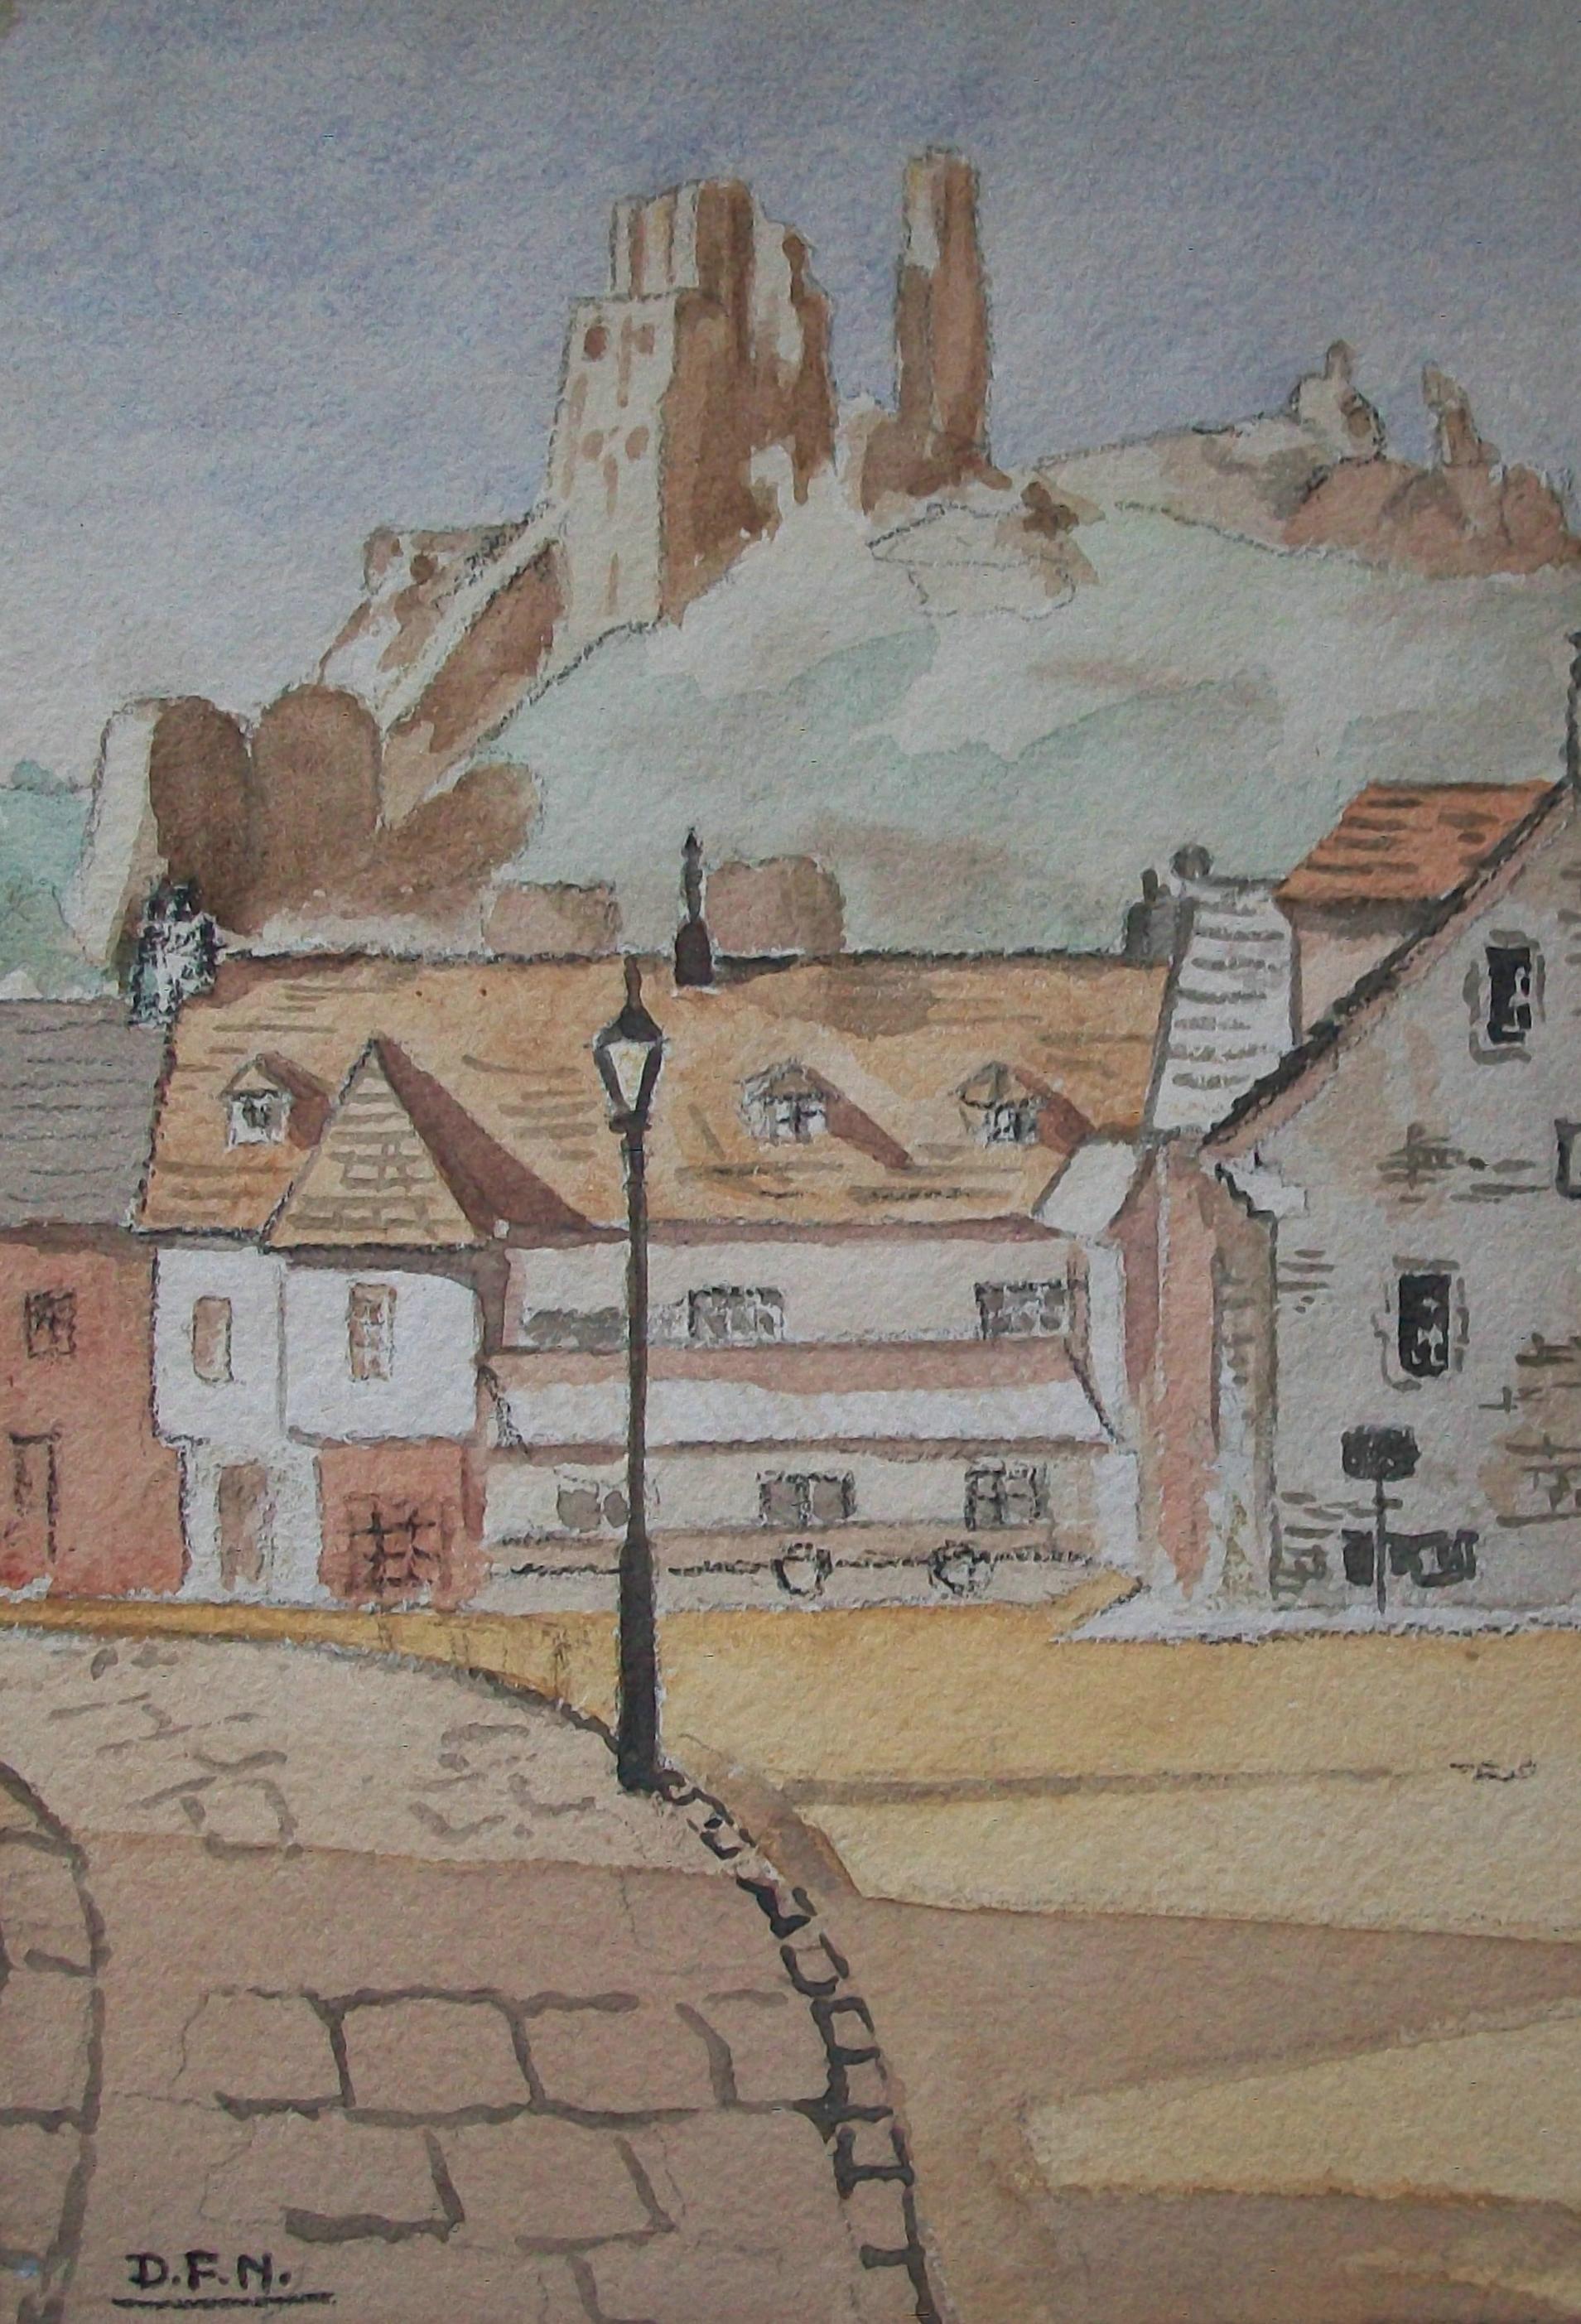 D.F.N. (Unknown/Unidentified Artist) - 'Corfe Castle - Dorset, U.K.' - Vintage watercolor painting on paper - unframed - initialed lower left - United Kingdom - 20th Century.

Good vintage condition - toning to the paper from a previous framing -